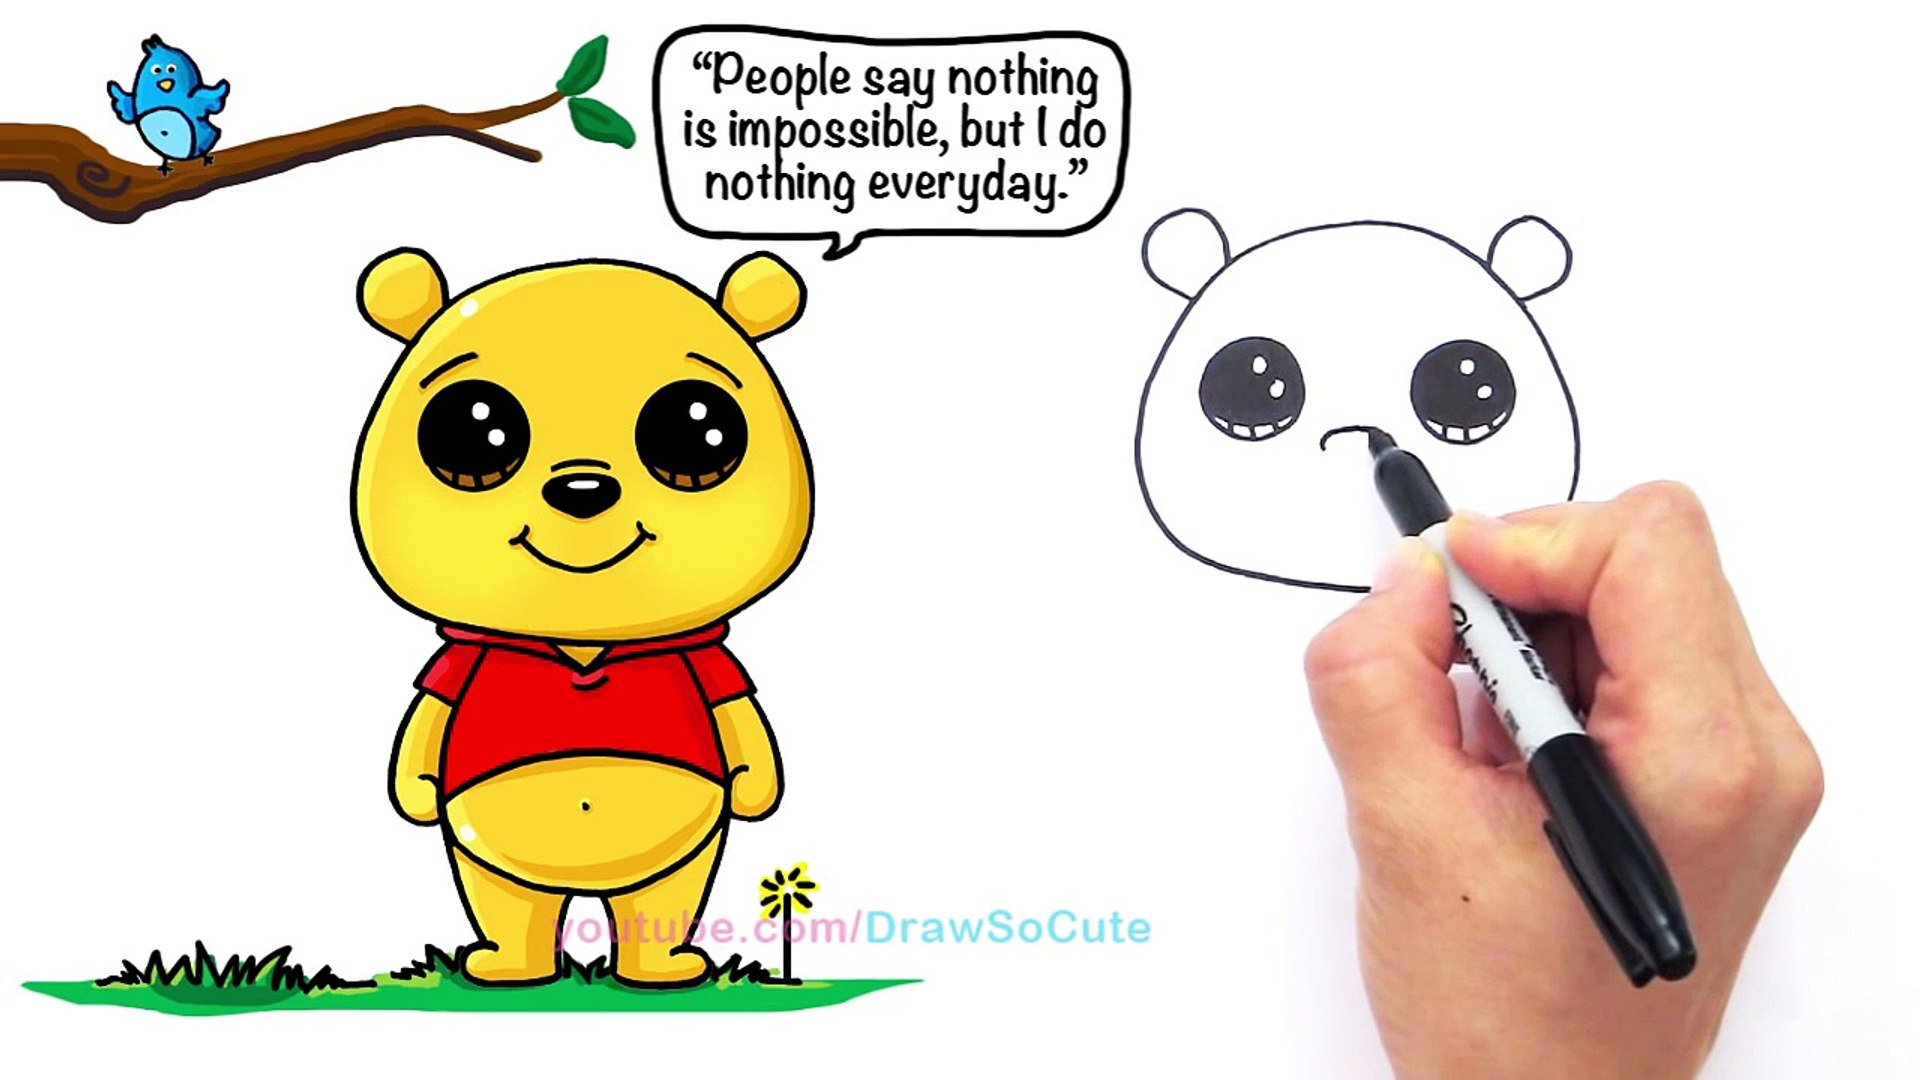 How to Draw Disney Winnie the Pooh Bear Cute and Easy - Dailymotion Video